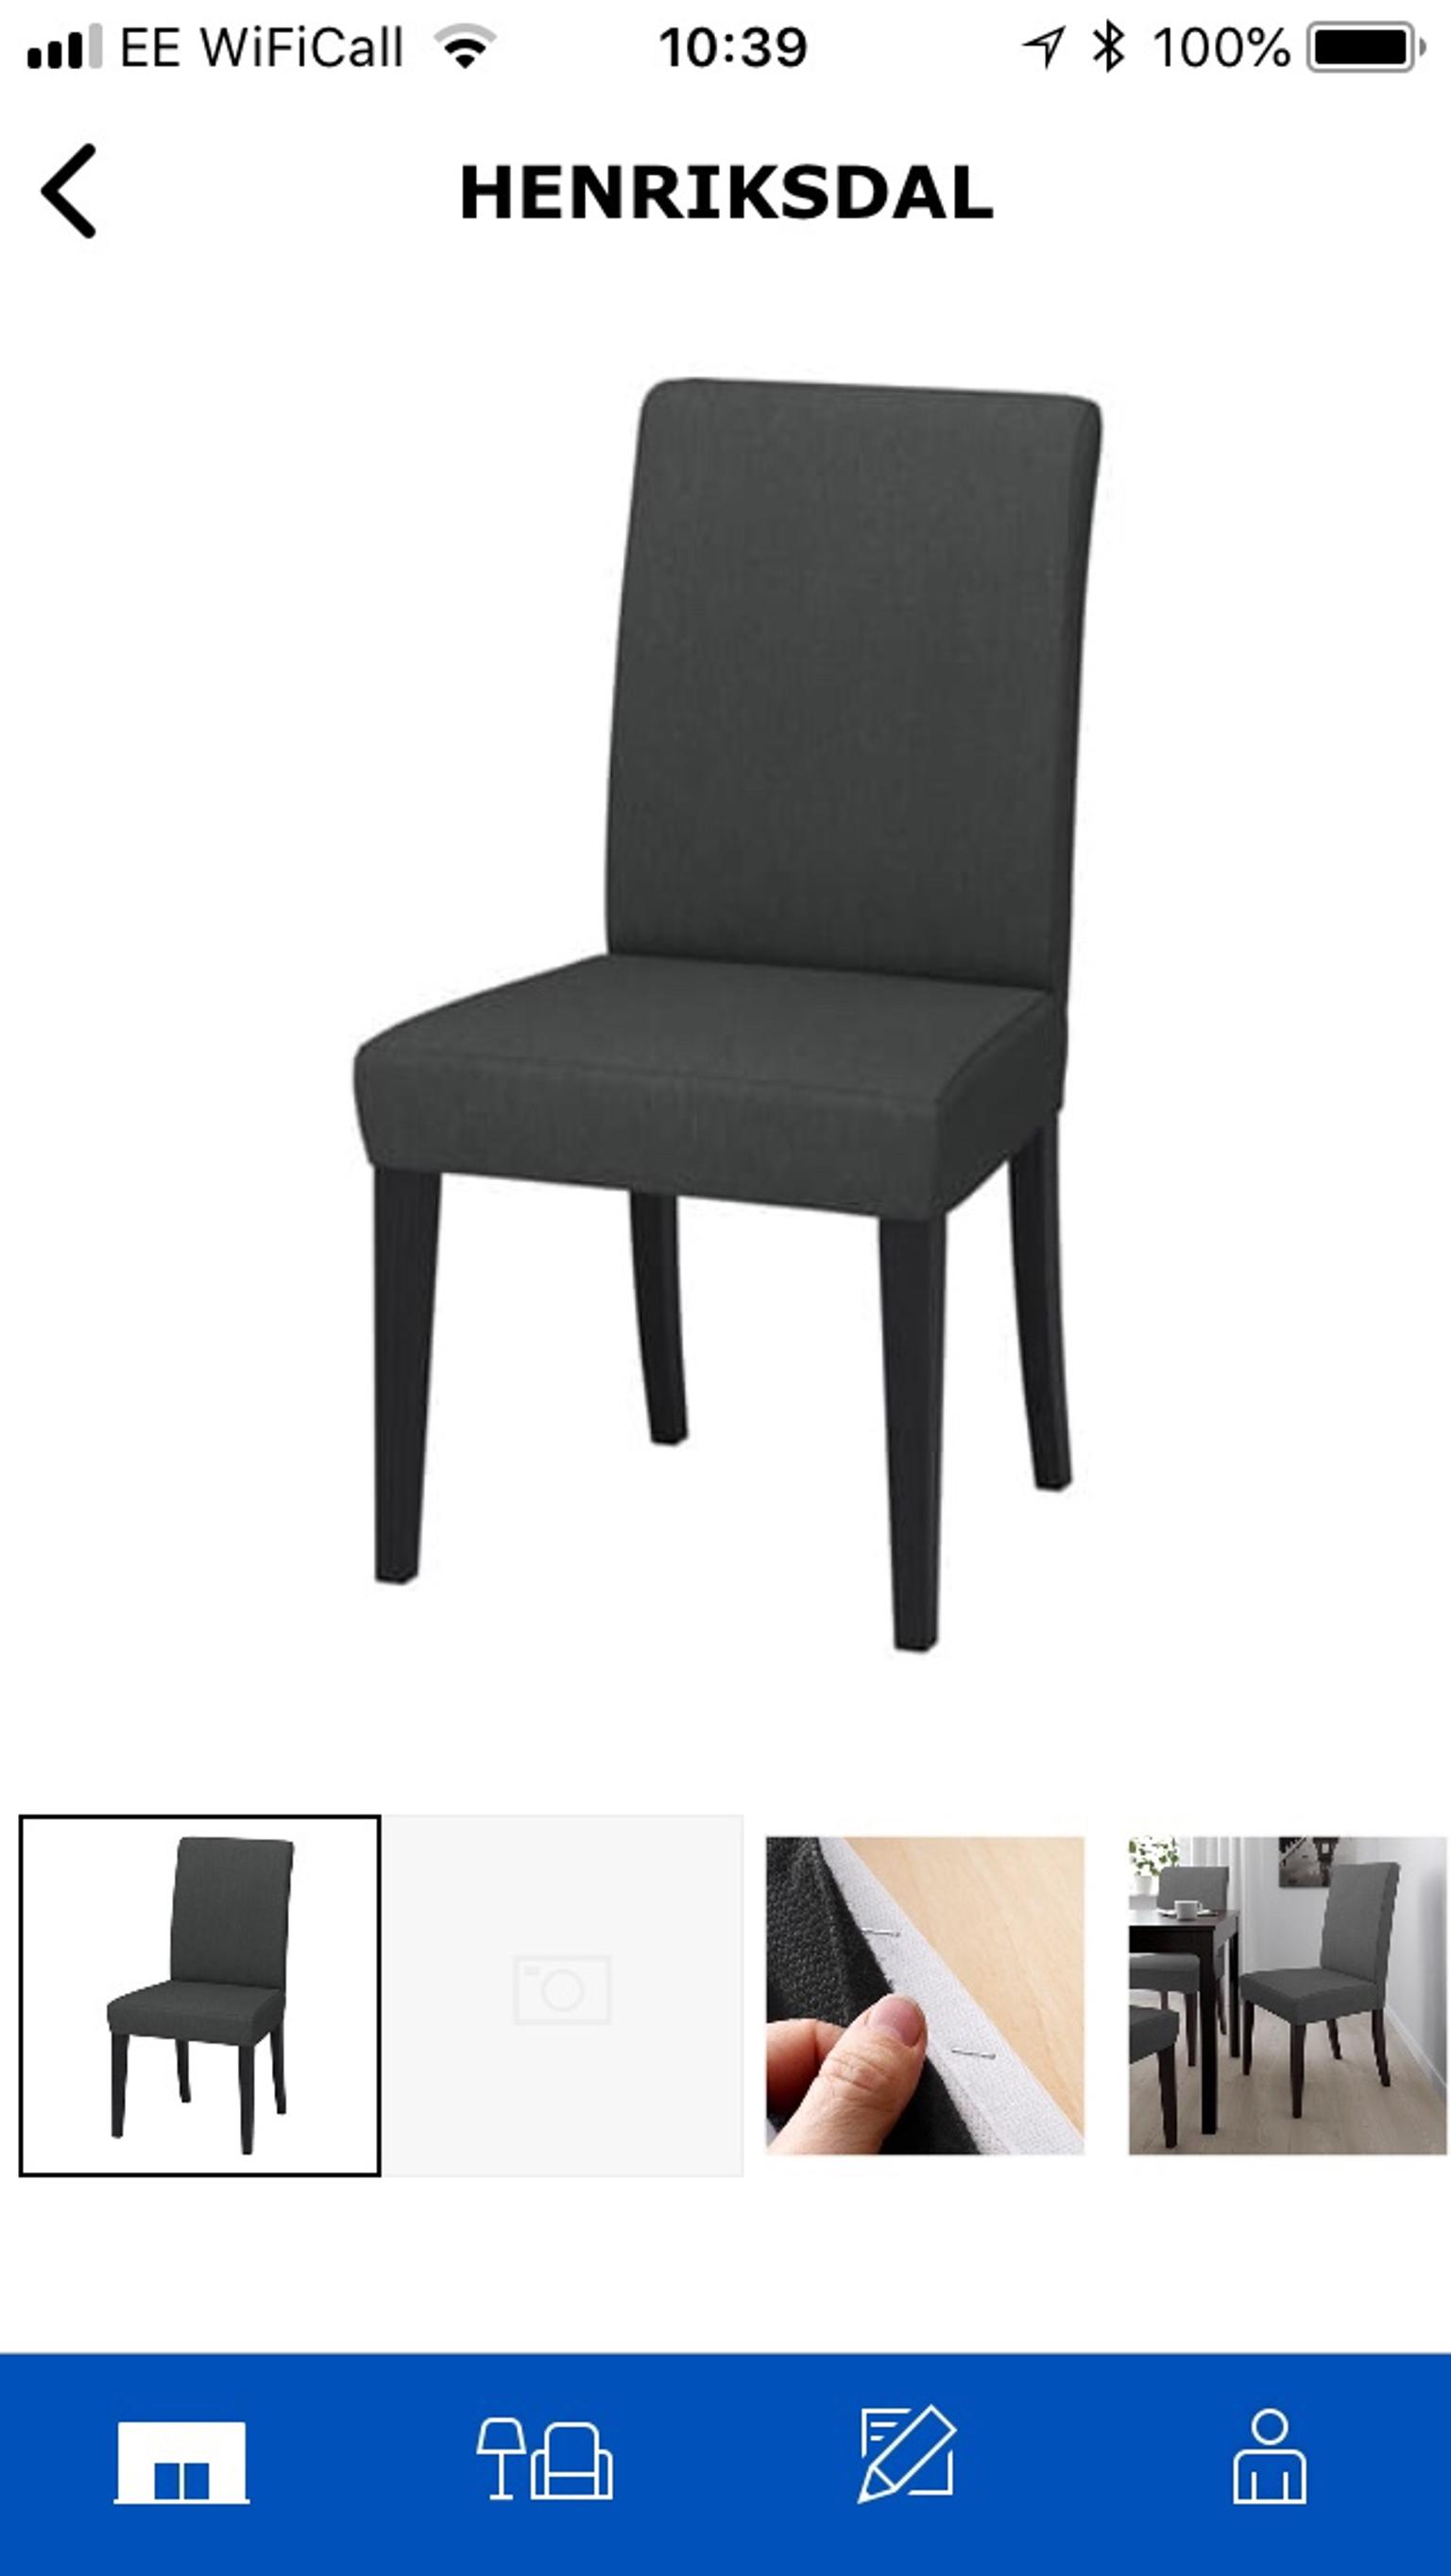 Ikea Henriksdal Set Of 4 Dining Chairs, Grey Dining Chairs Set Of 4 Ikea